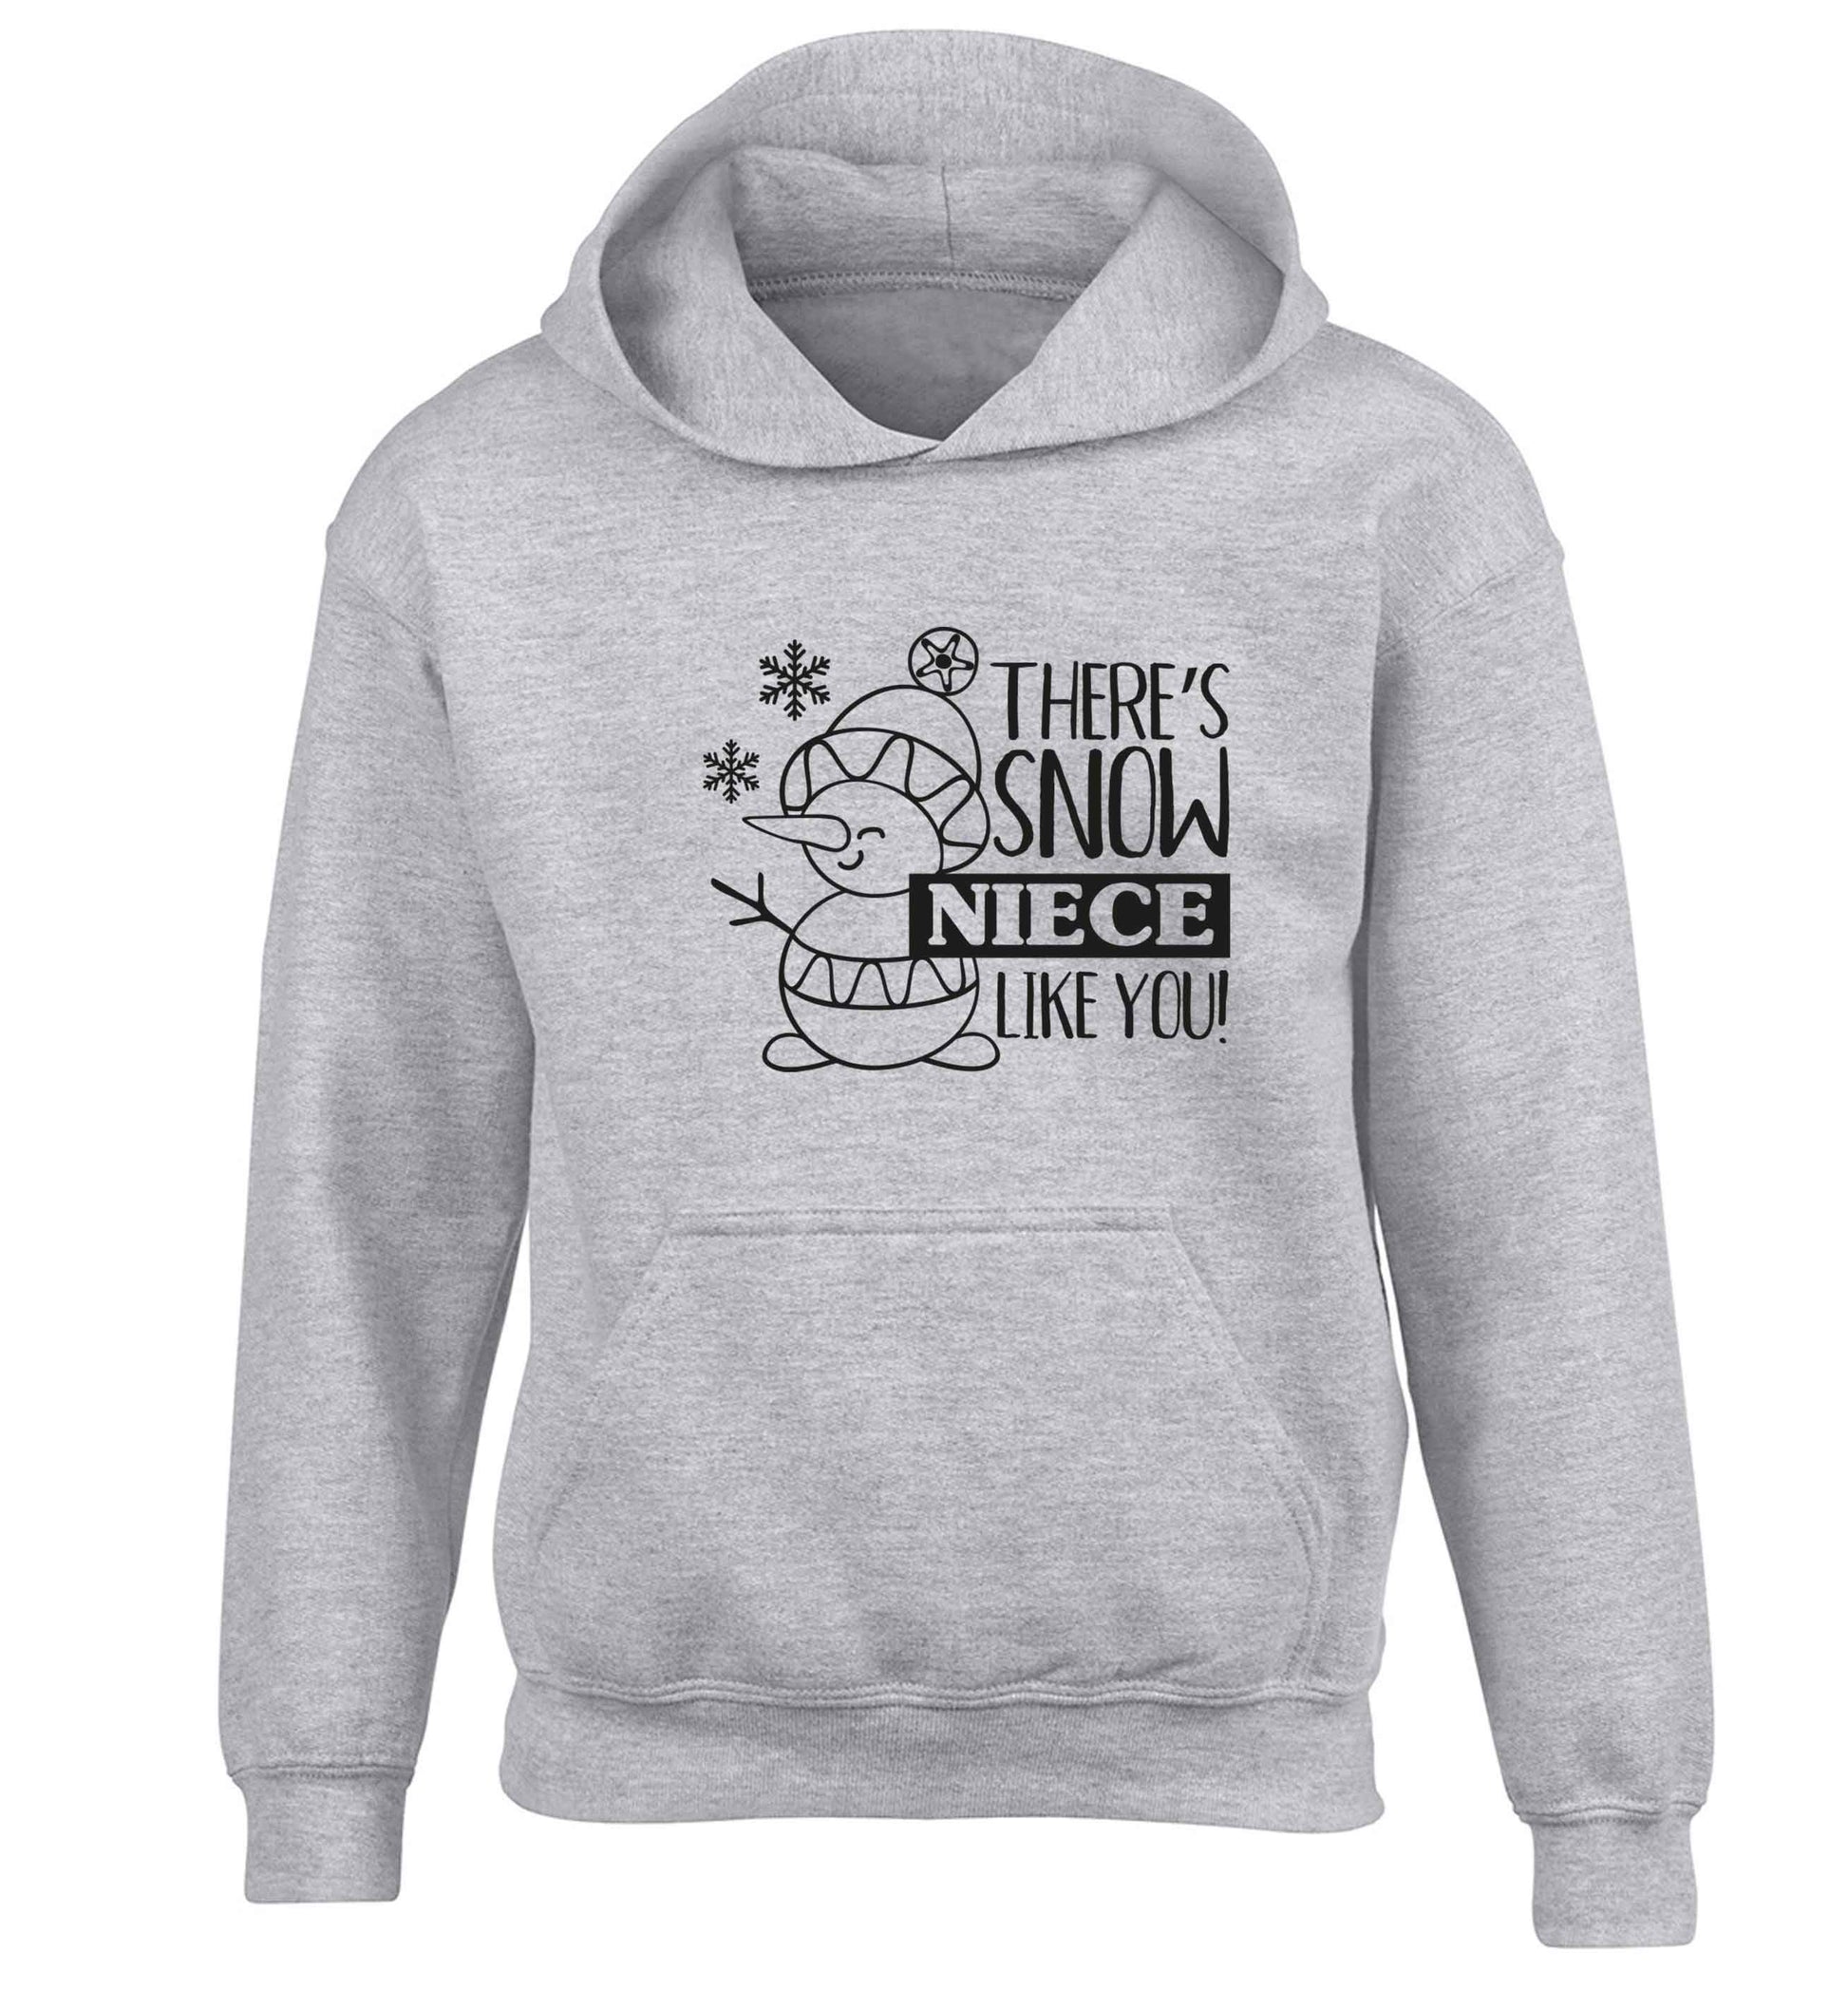 There's snow niece like you children's grey hoodie 12-13 Years